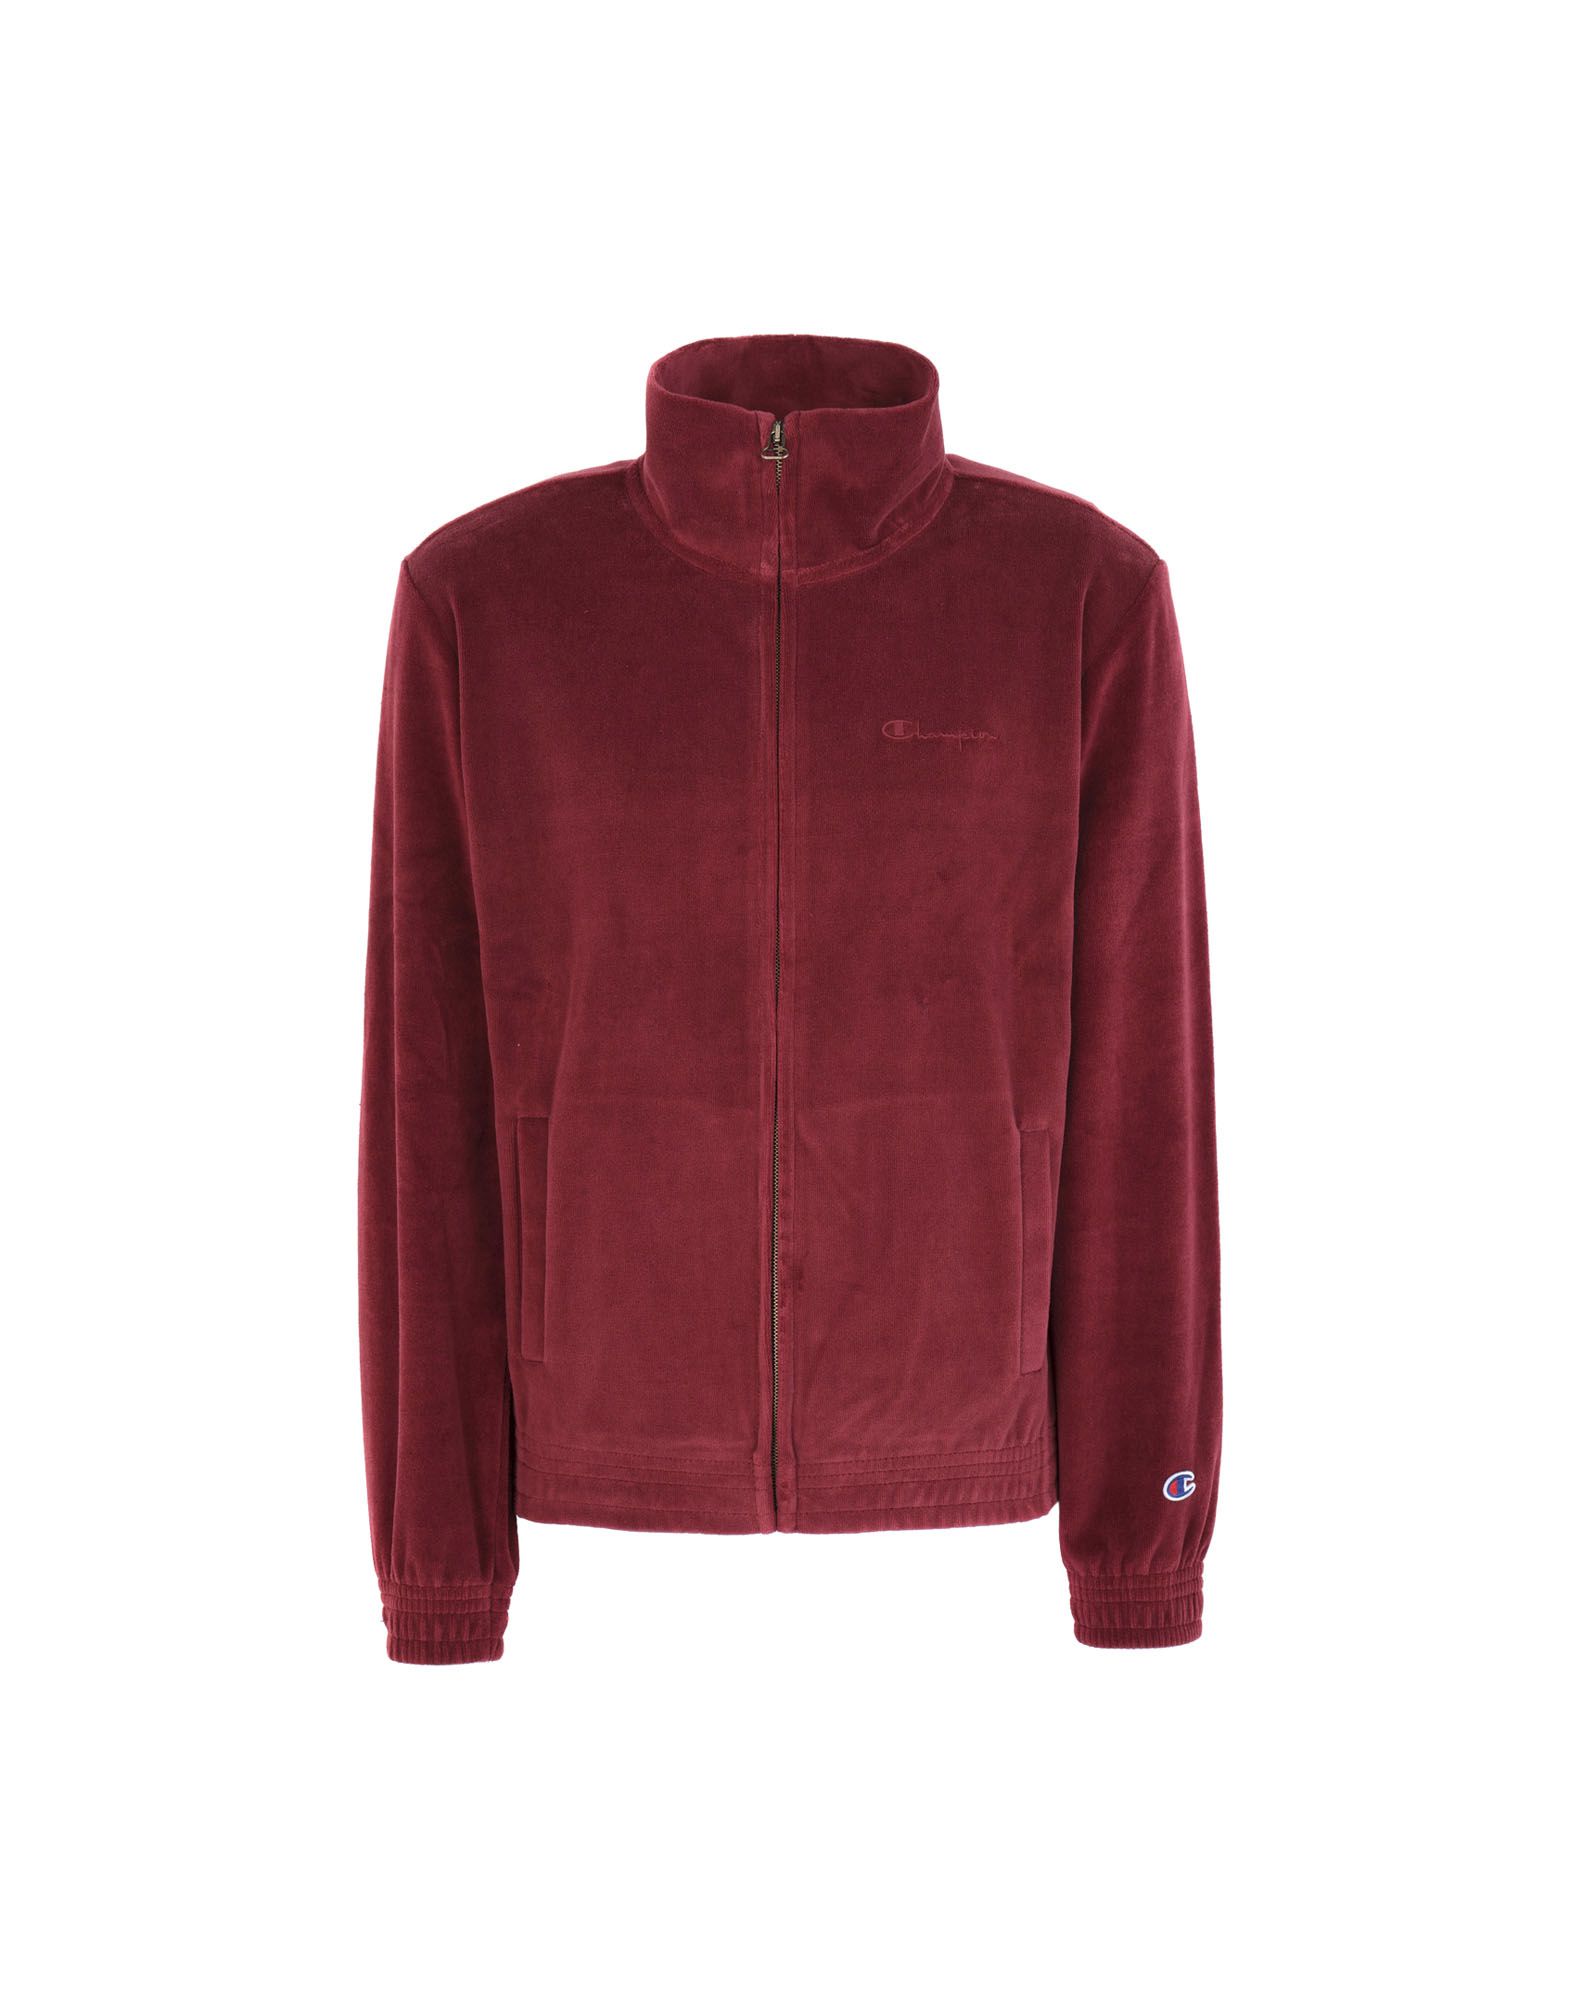 red champion jumpers